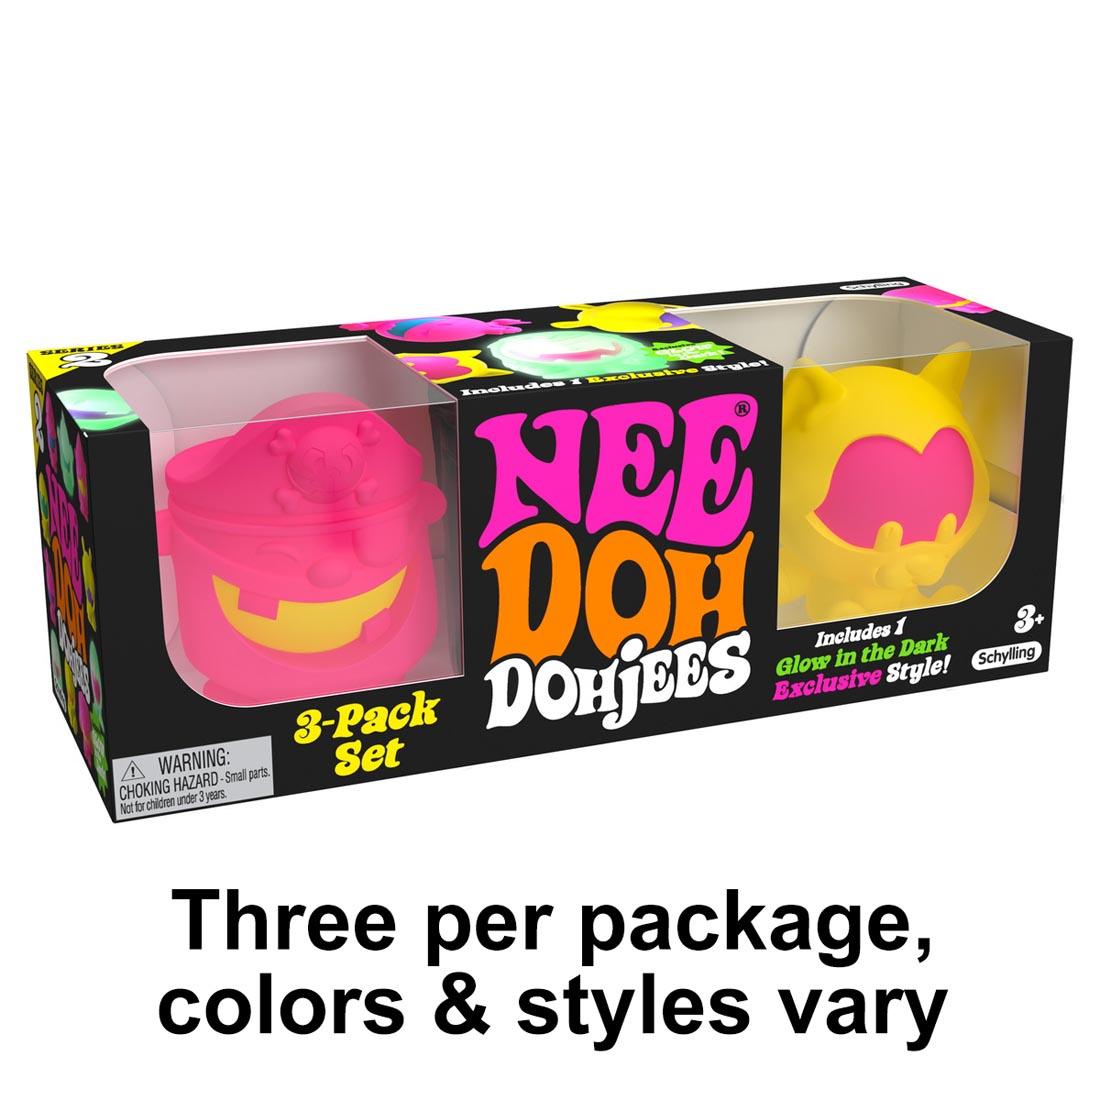 box for Nee Doh Dohjee 3 Pack with text Three per package, colors & styles vary